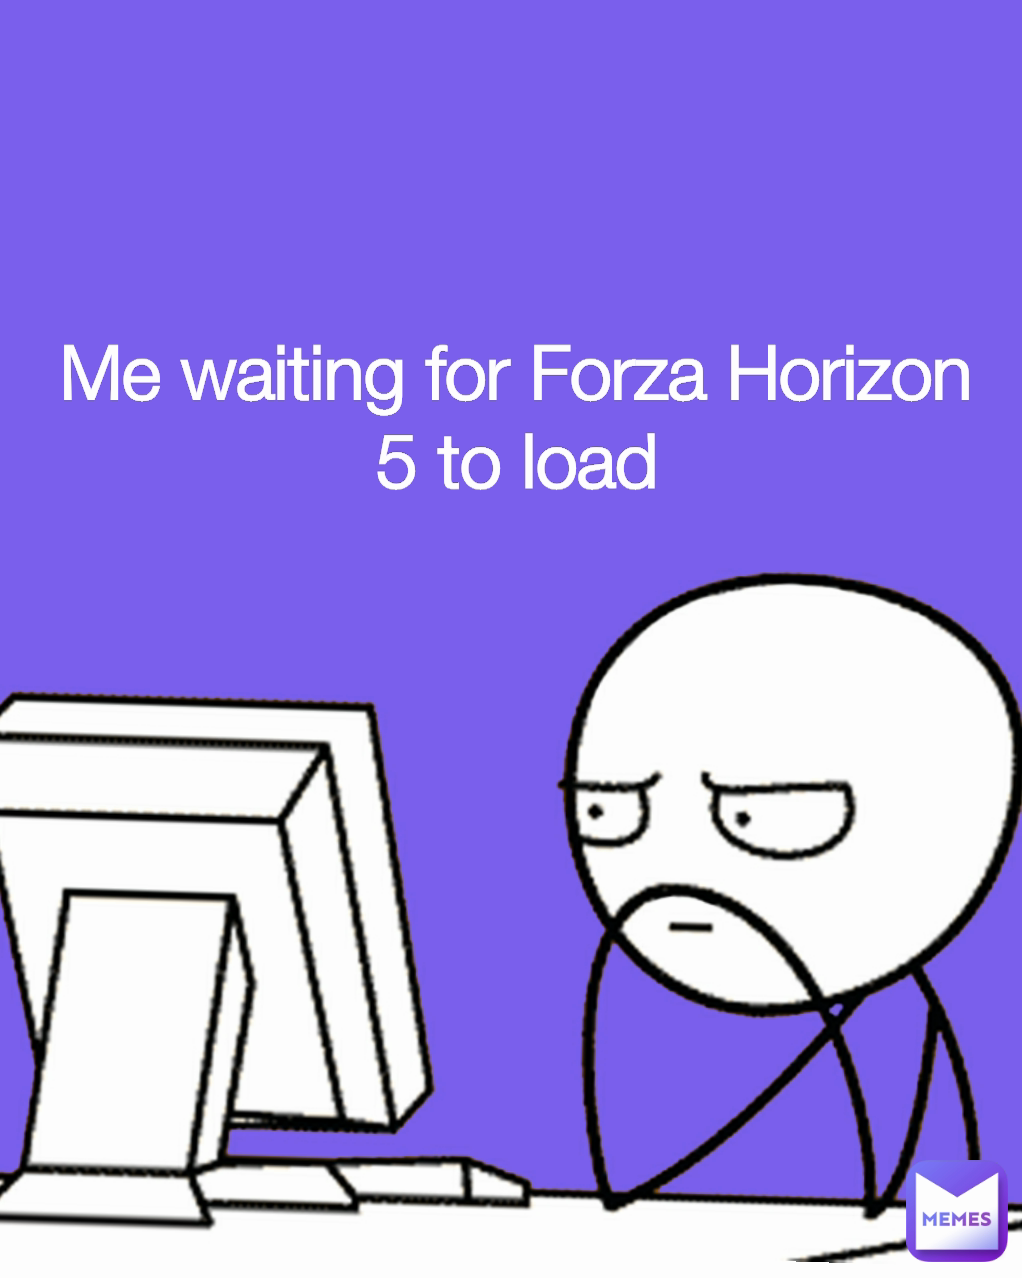 Me waiting for Forza Horizon 5 to load